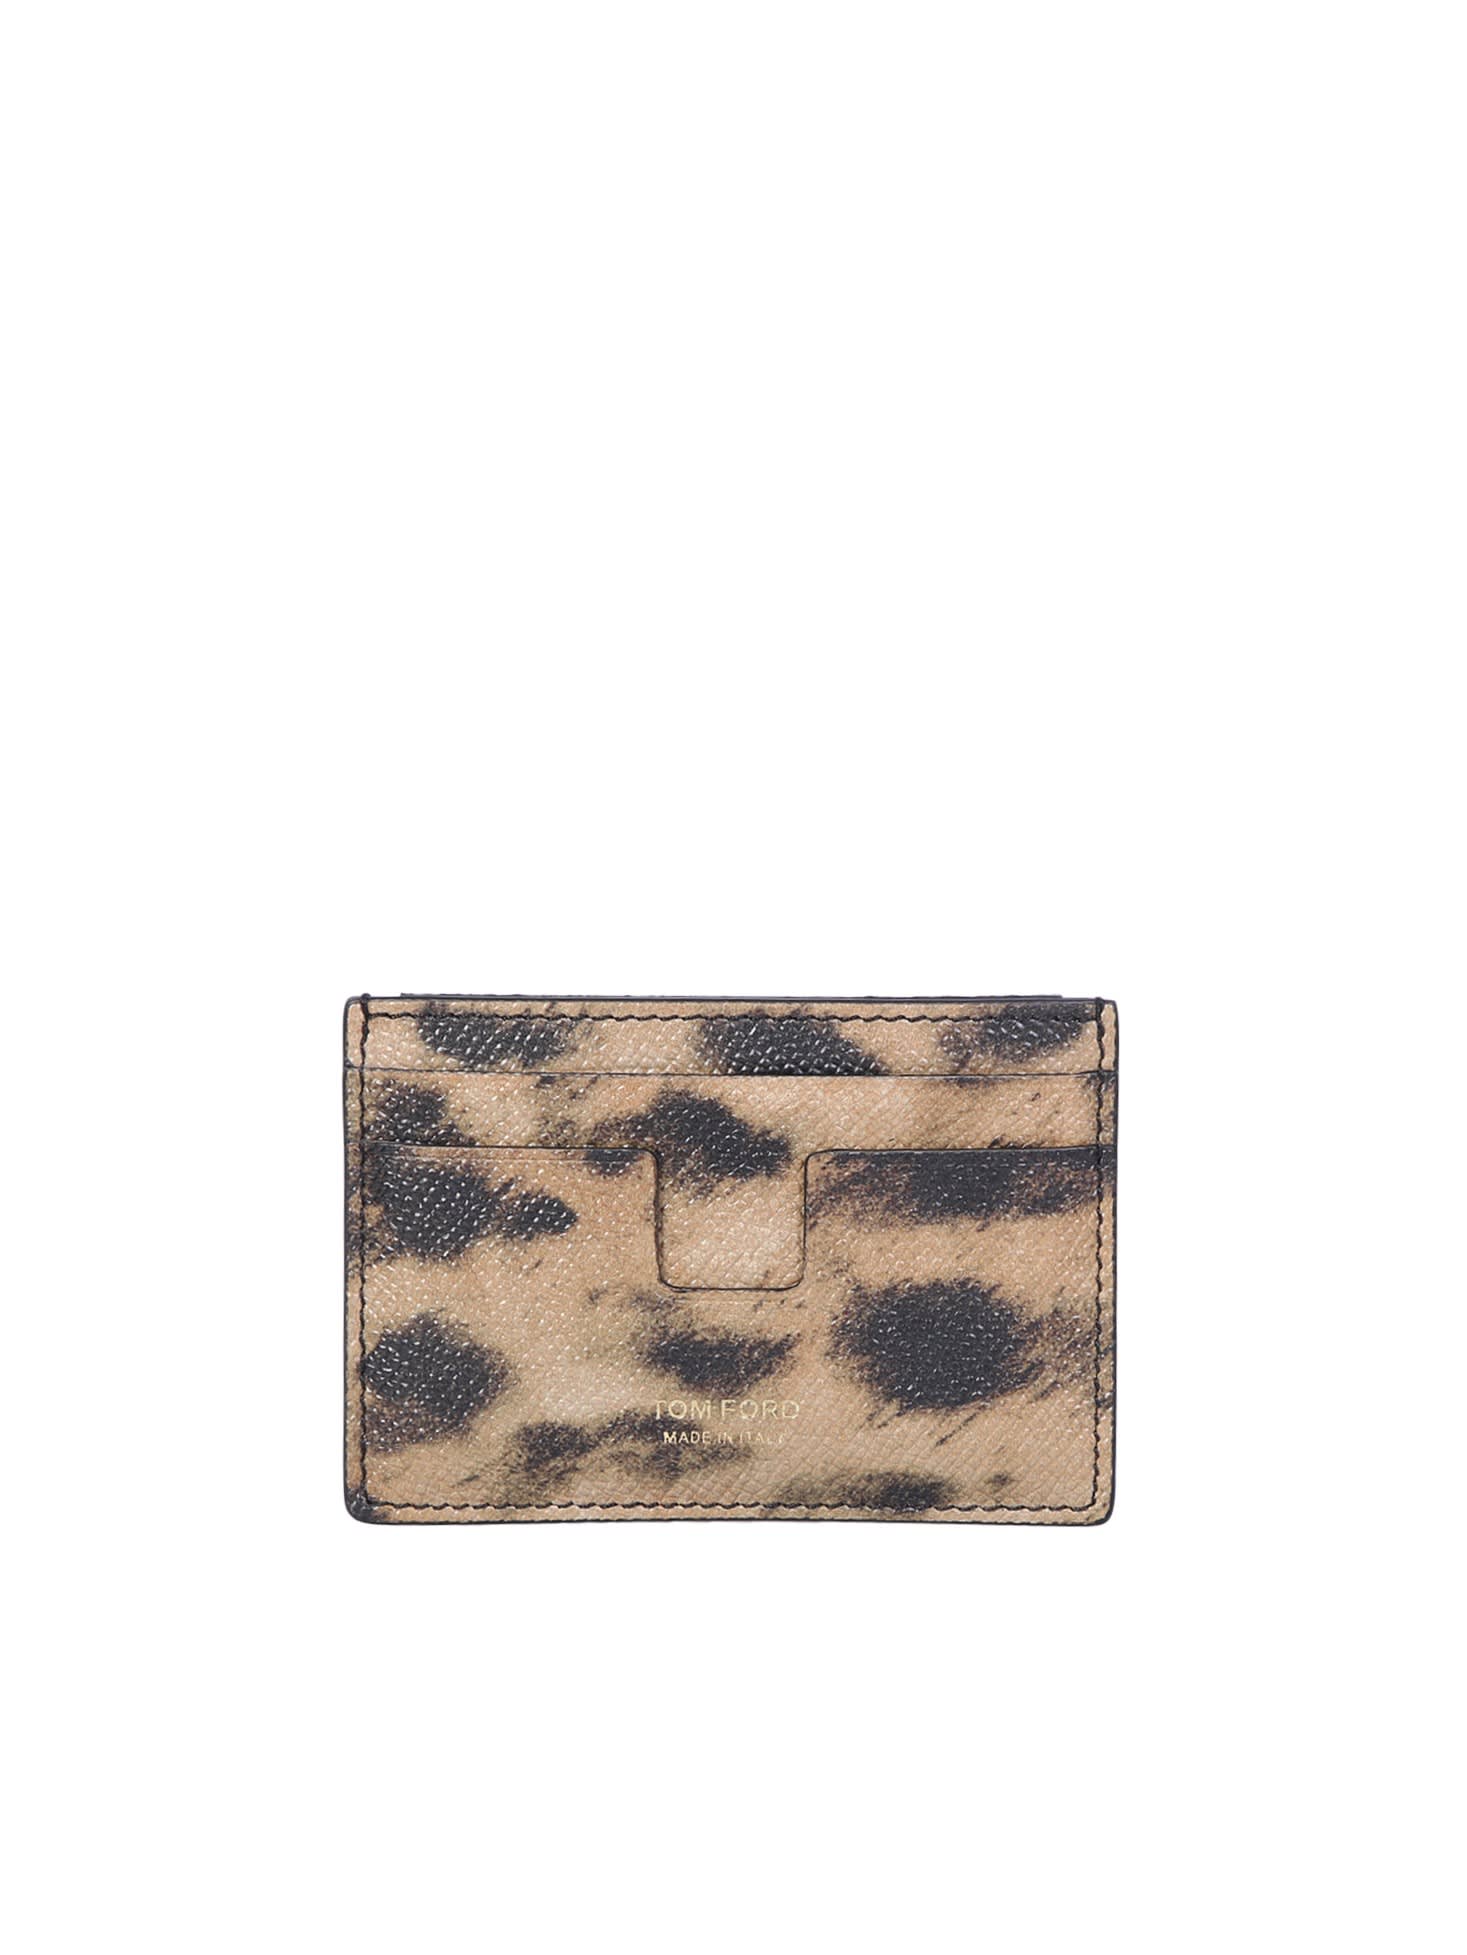 Tom Ford Logo Print To The Front. Leopard Motif. Card Slots. Sheepskin Lining. Logo In Gold-coloured Letters. In Beige